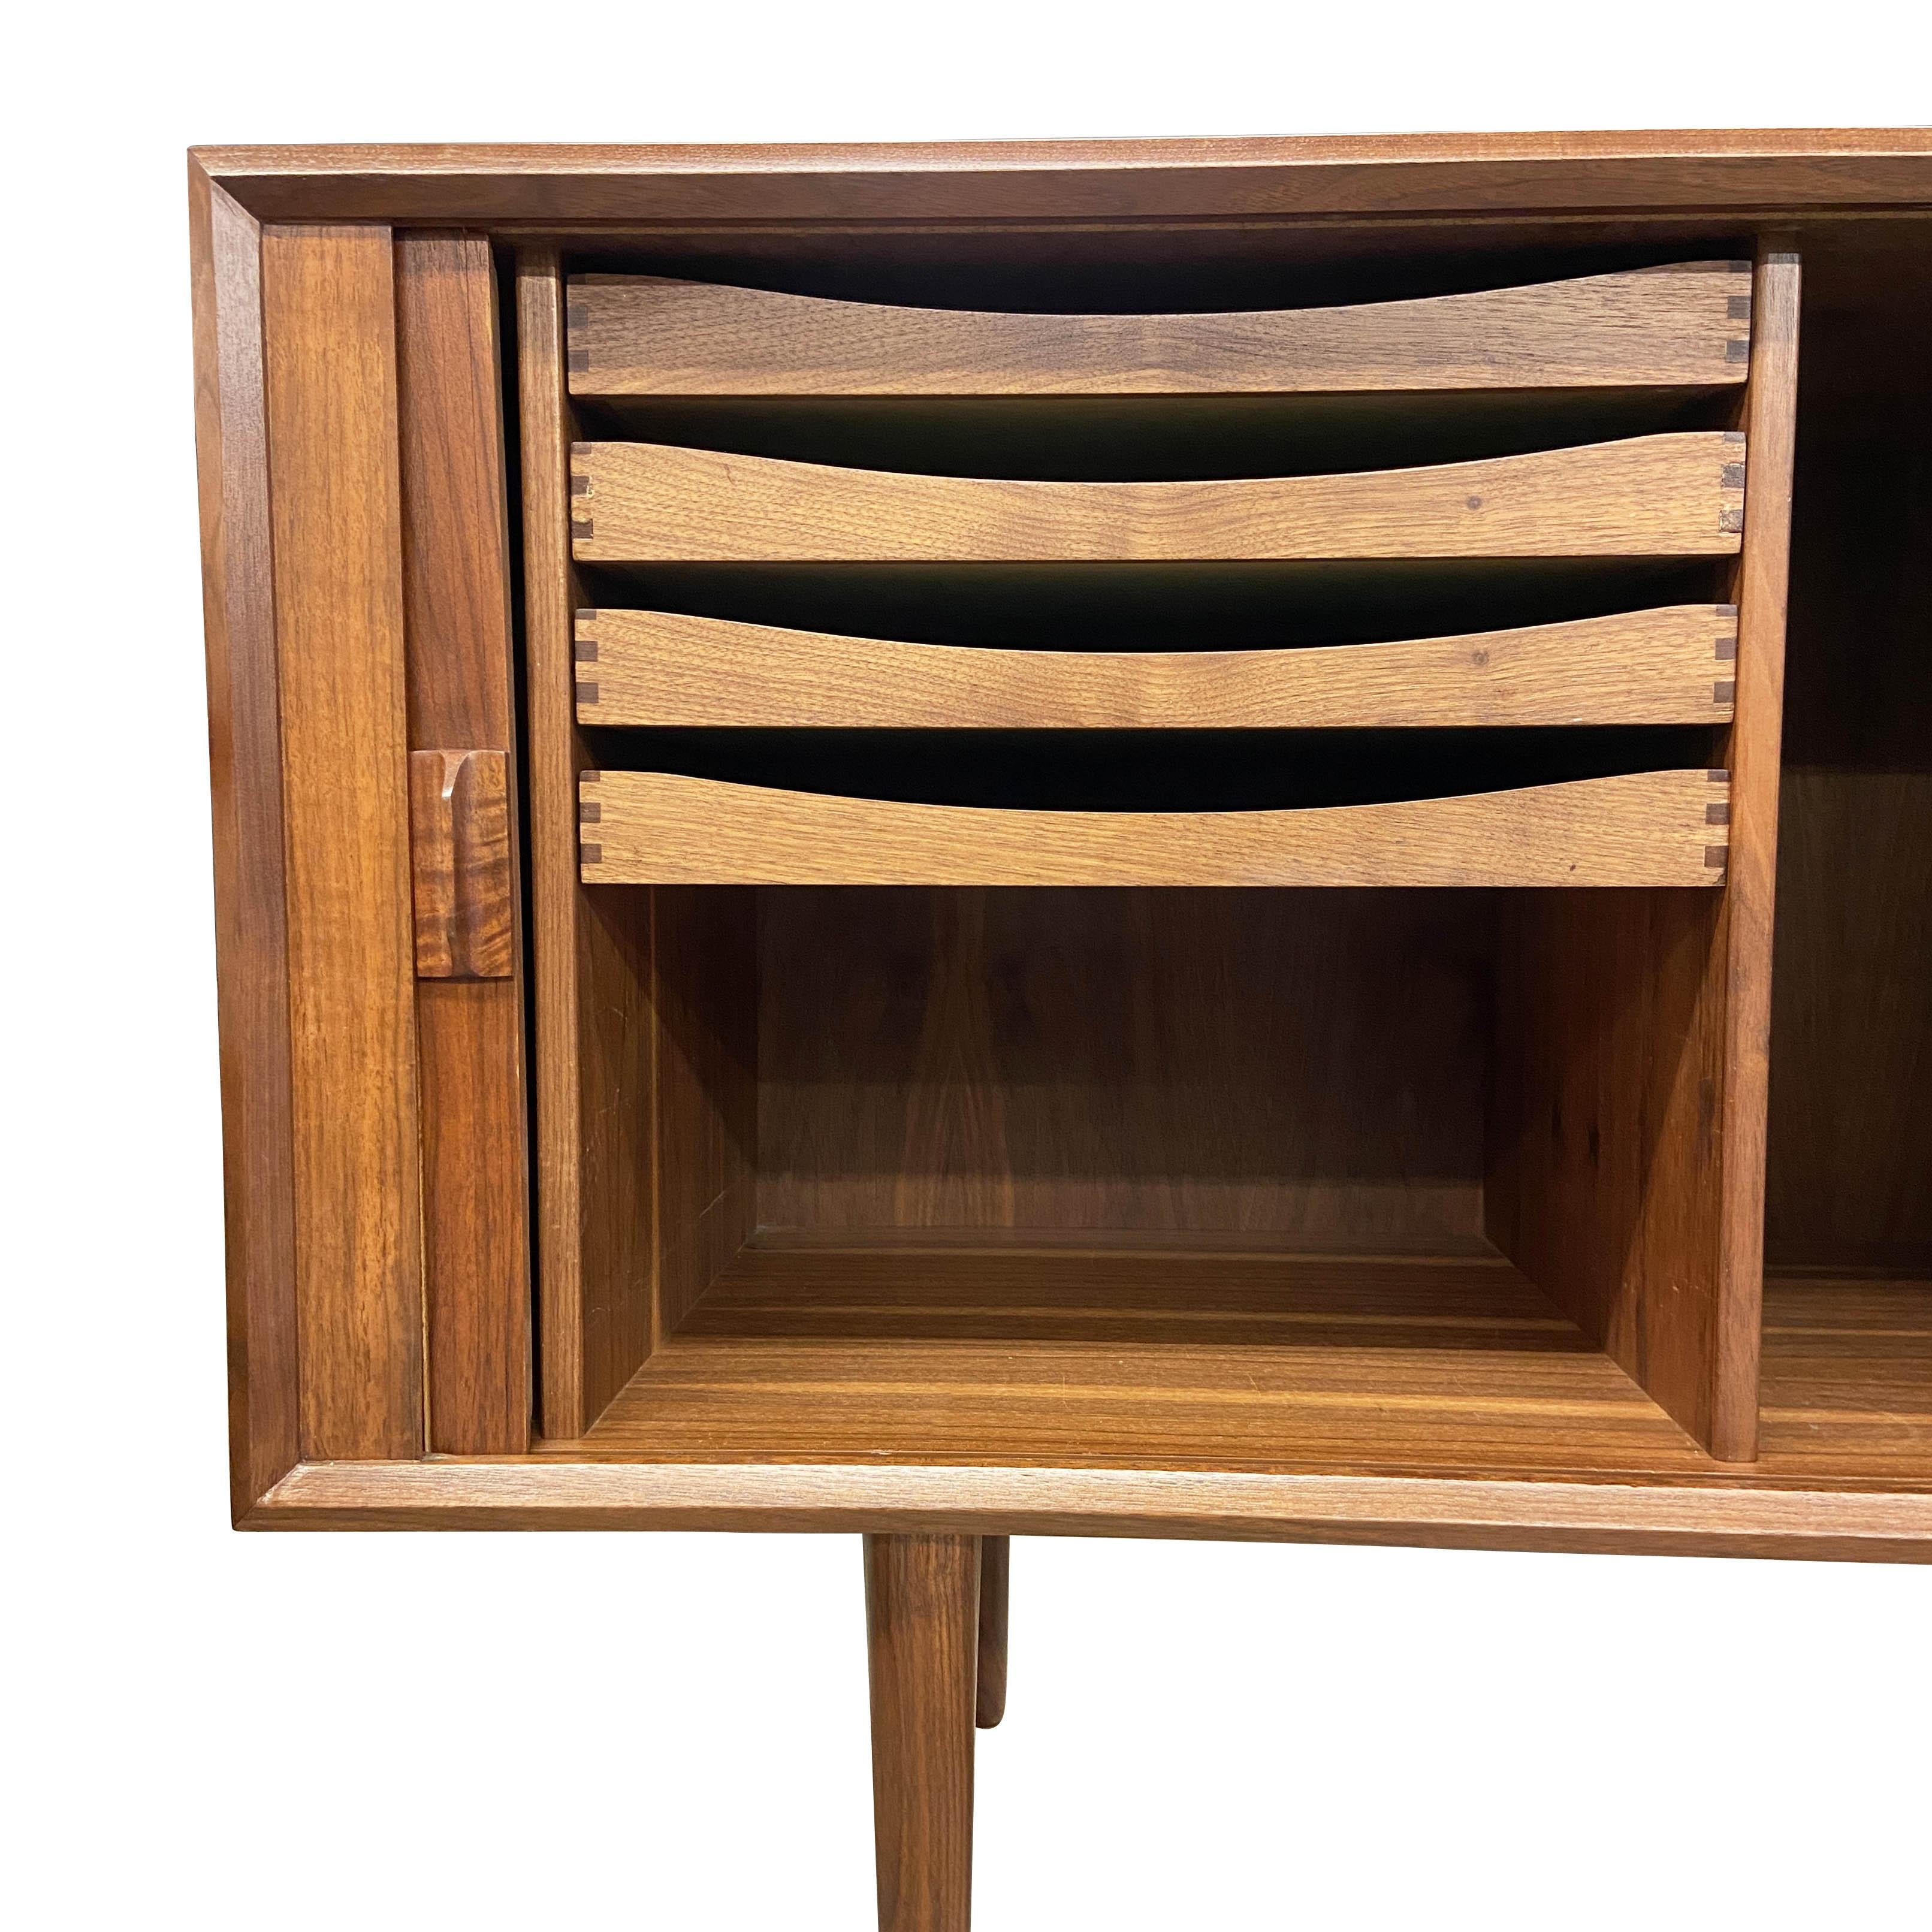 Expertly refinished teak credenza in superb condition featuring tambour style sliding doors and four pull out drawers, which are lined with felt. Designed by Svend Aage Larsen, this handsome 1960's piece sits on four sculpted wood legs. Beautiful